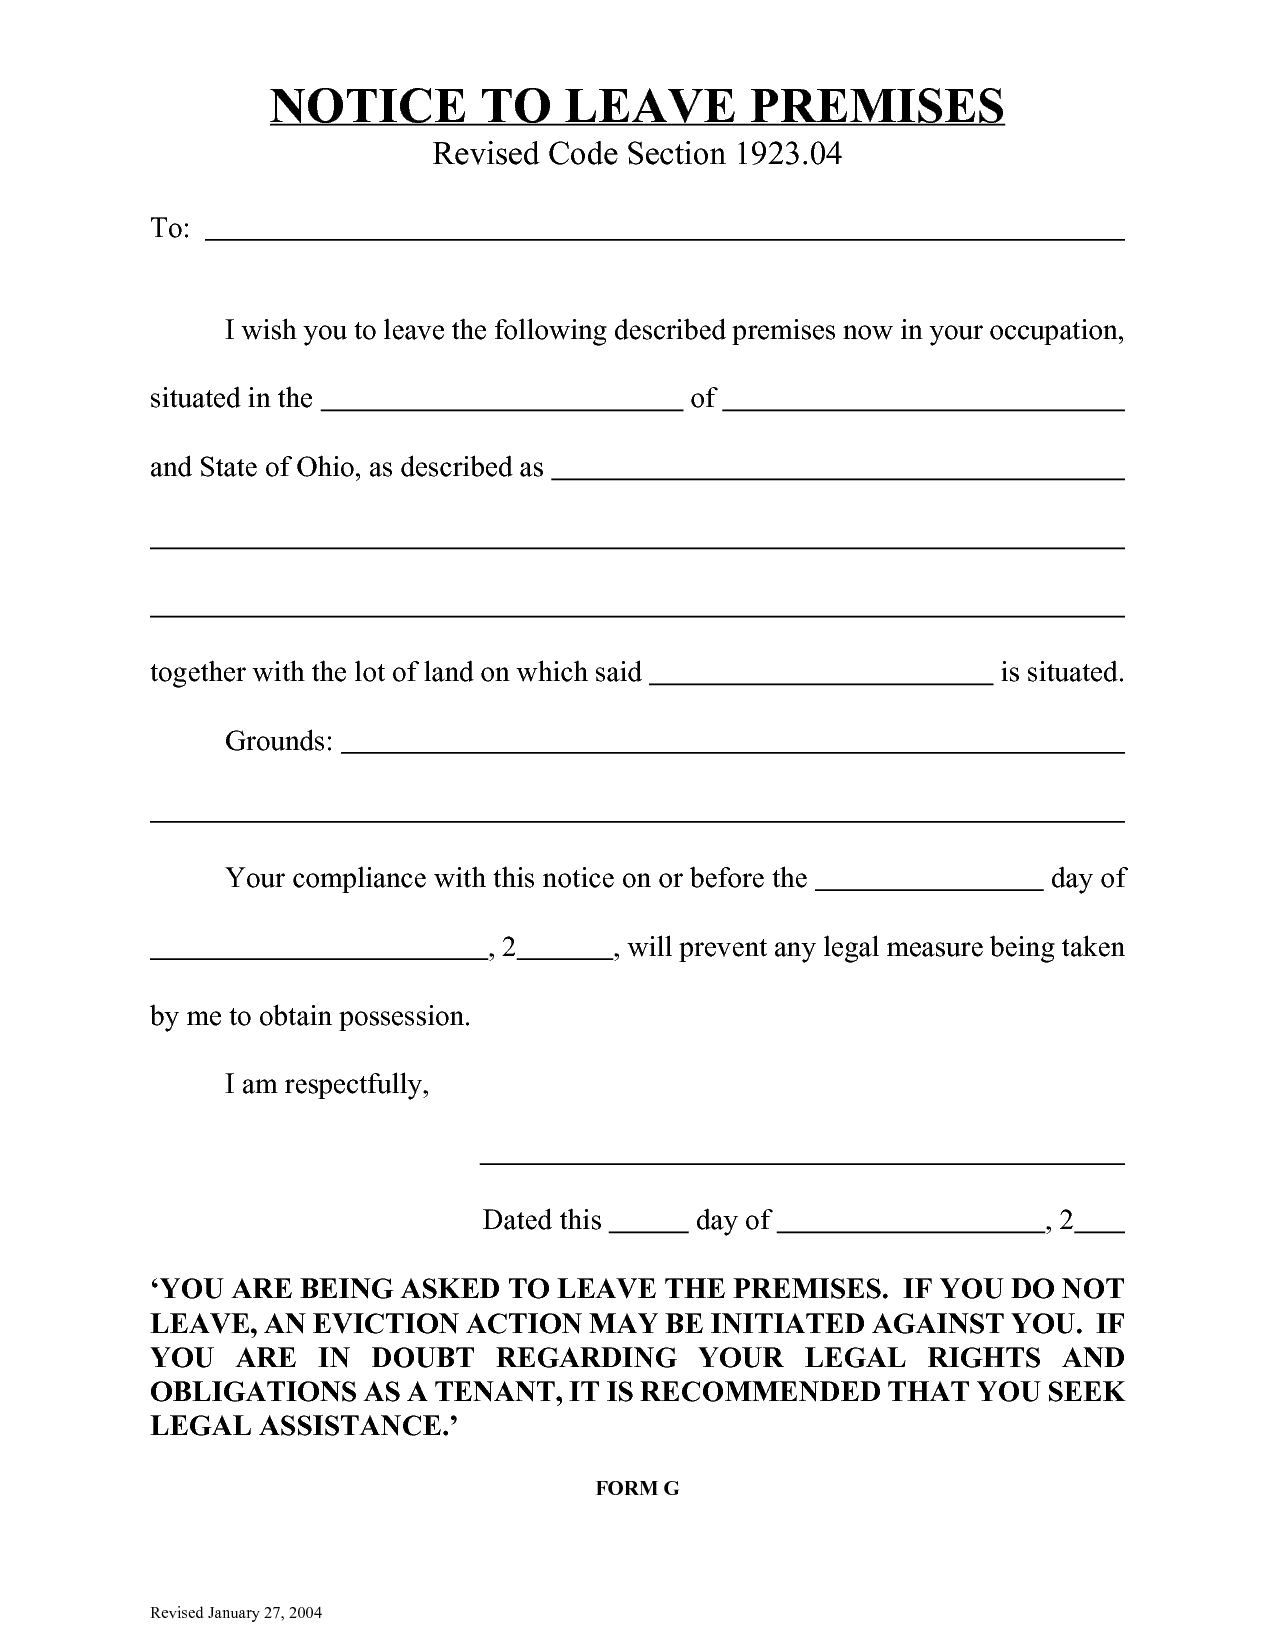 10 Best Images Of Eviction Notice Florida Form Blank Template Via 3 - Free Printable Eviction Notice Ohio